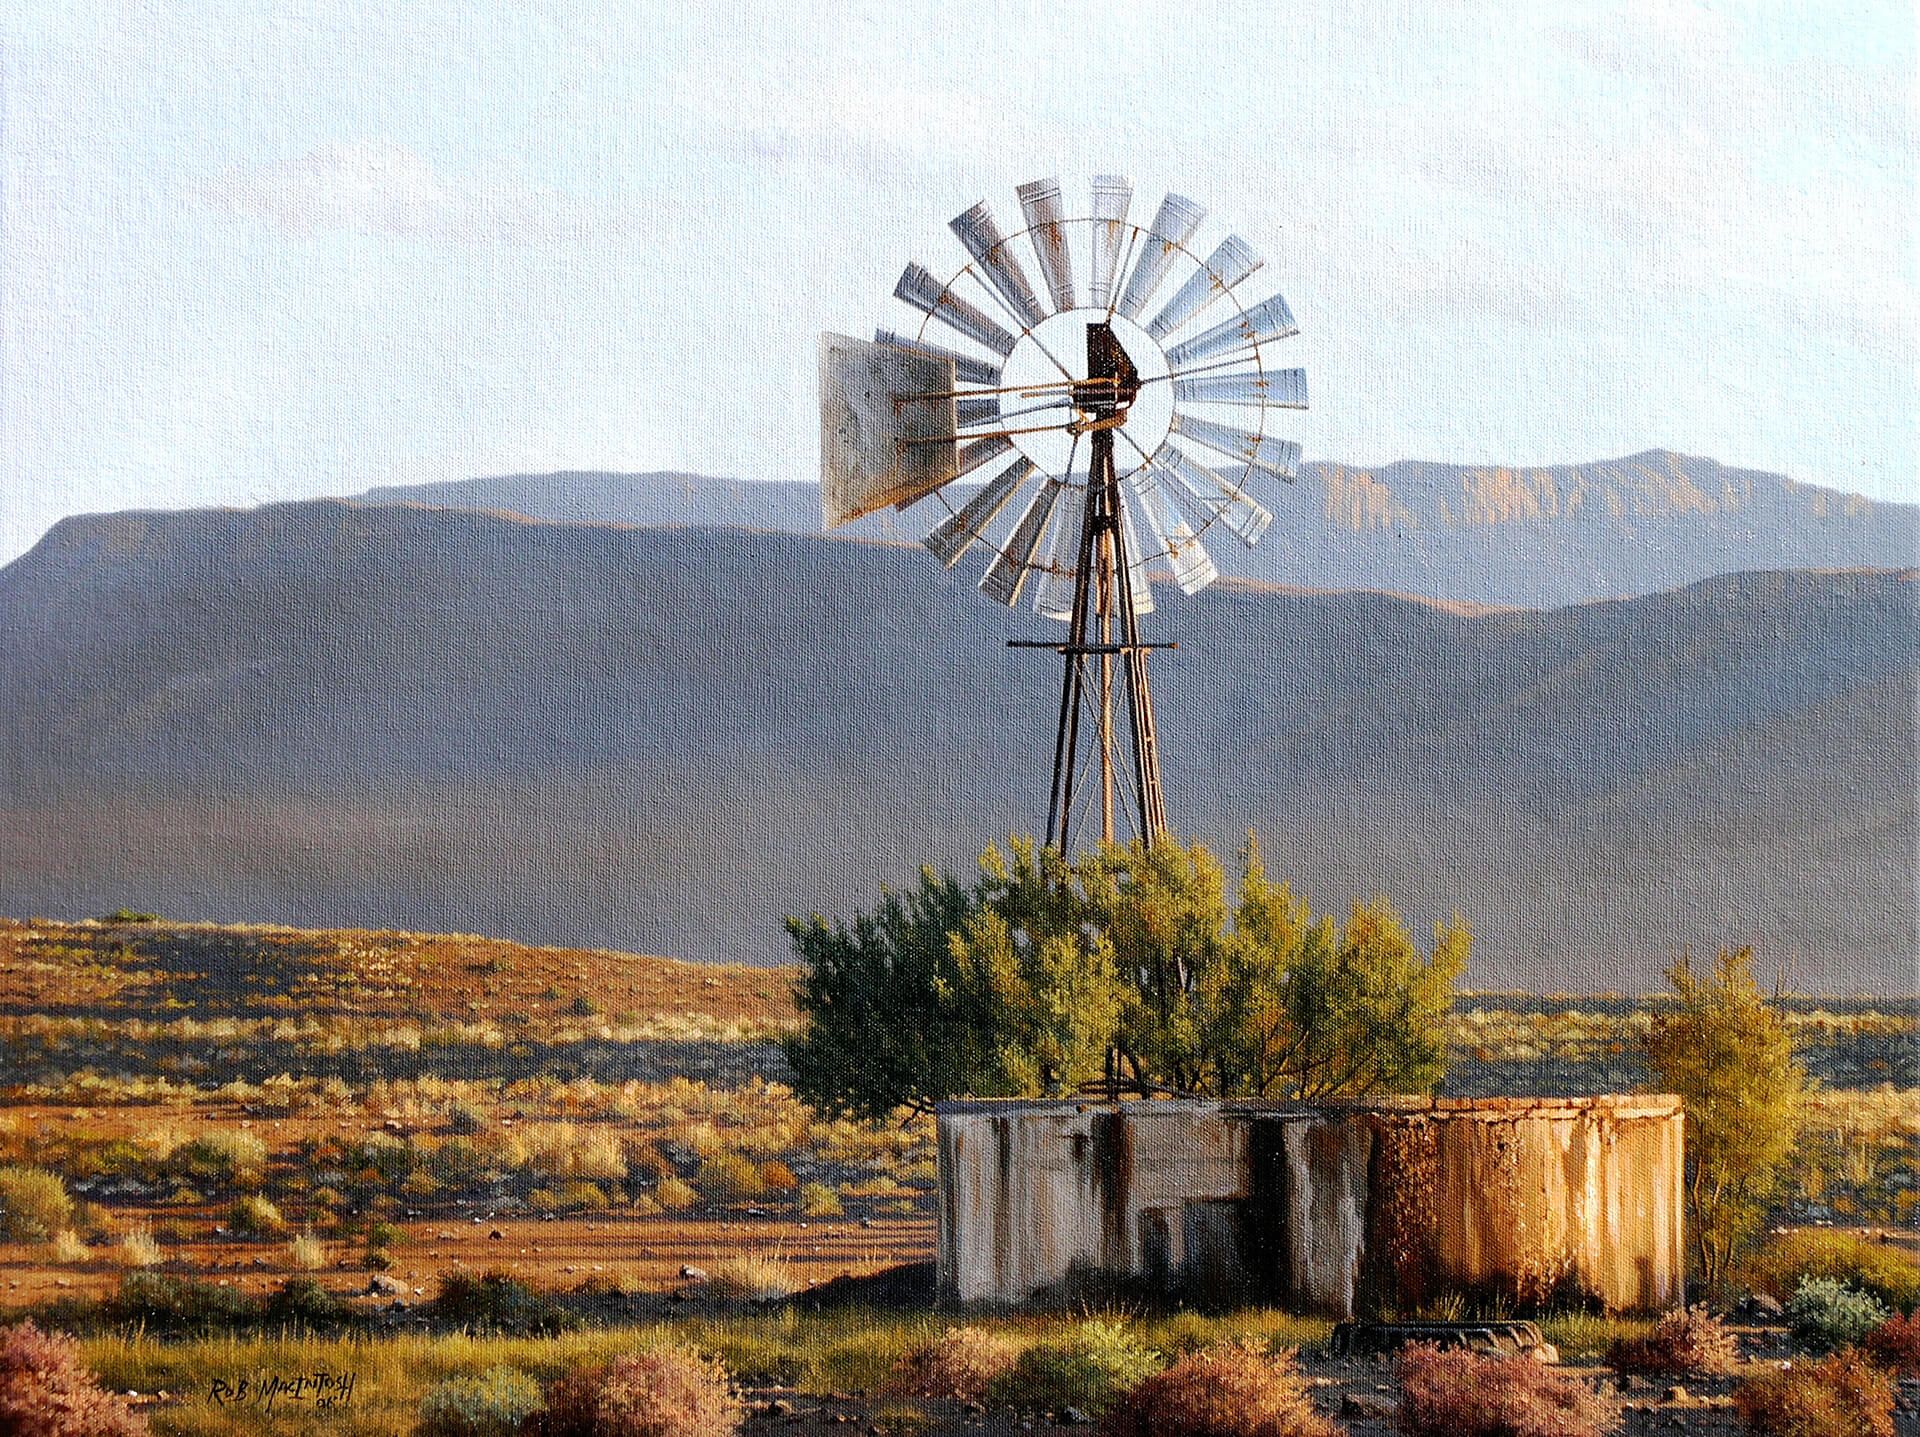 Photorealistic painting of an old windmill